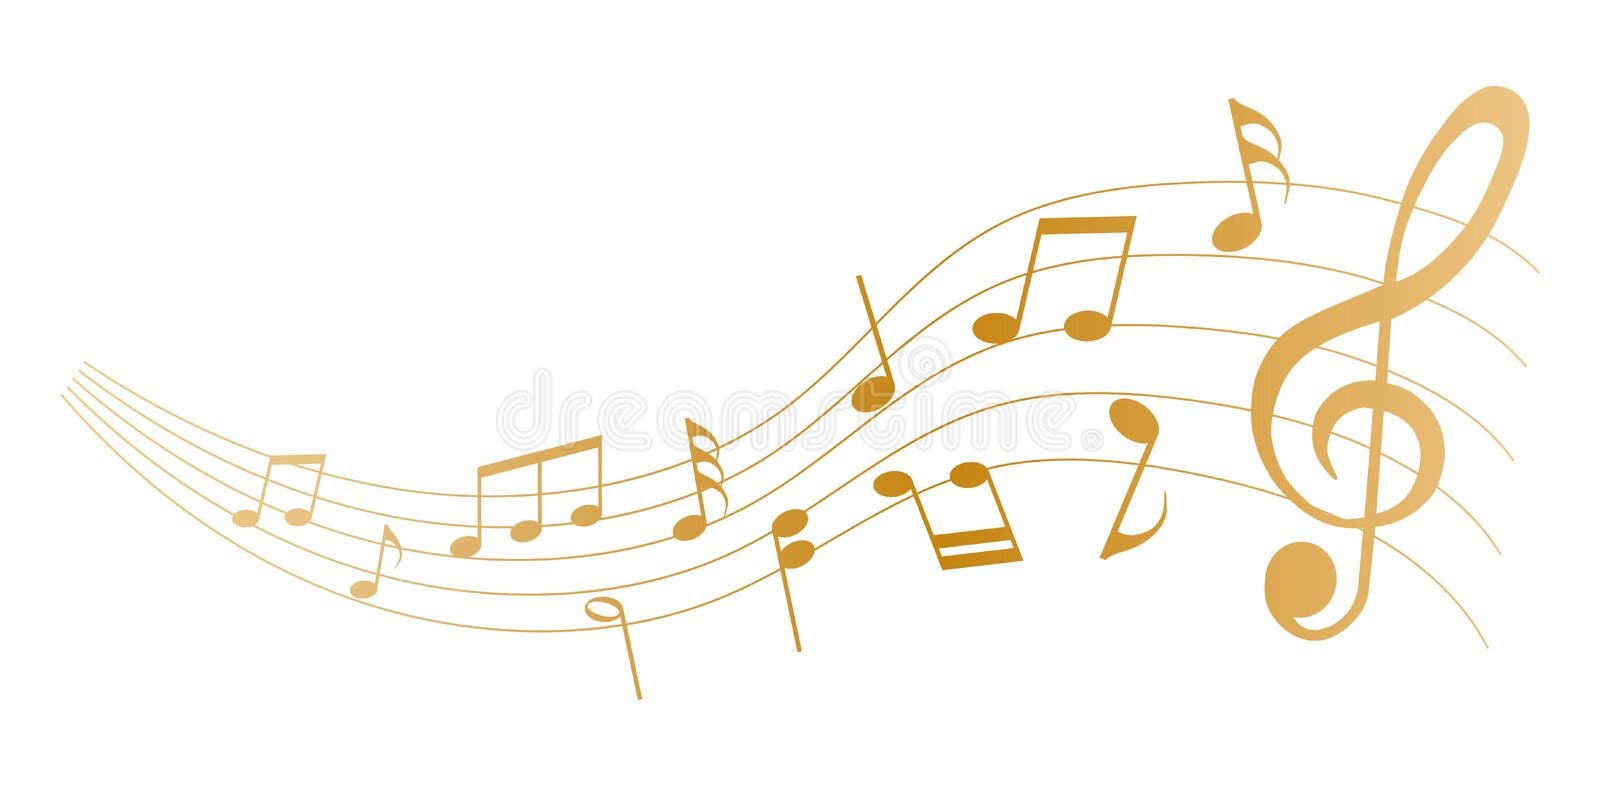 Gold Music Notes on Transparent Background Stock Vector - Illustration ...